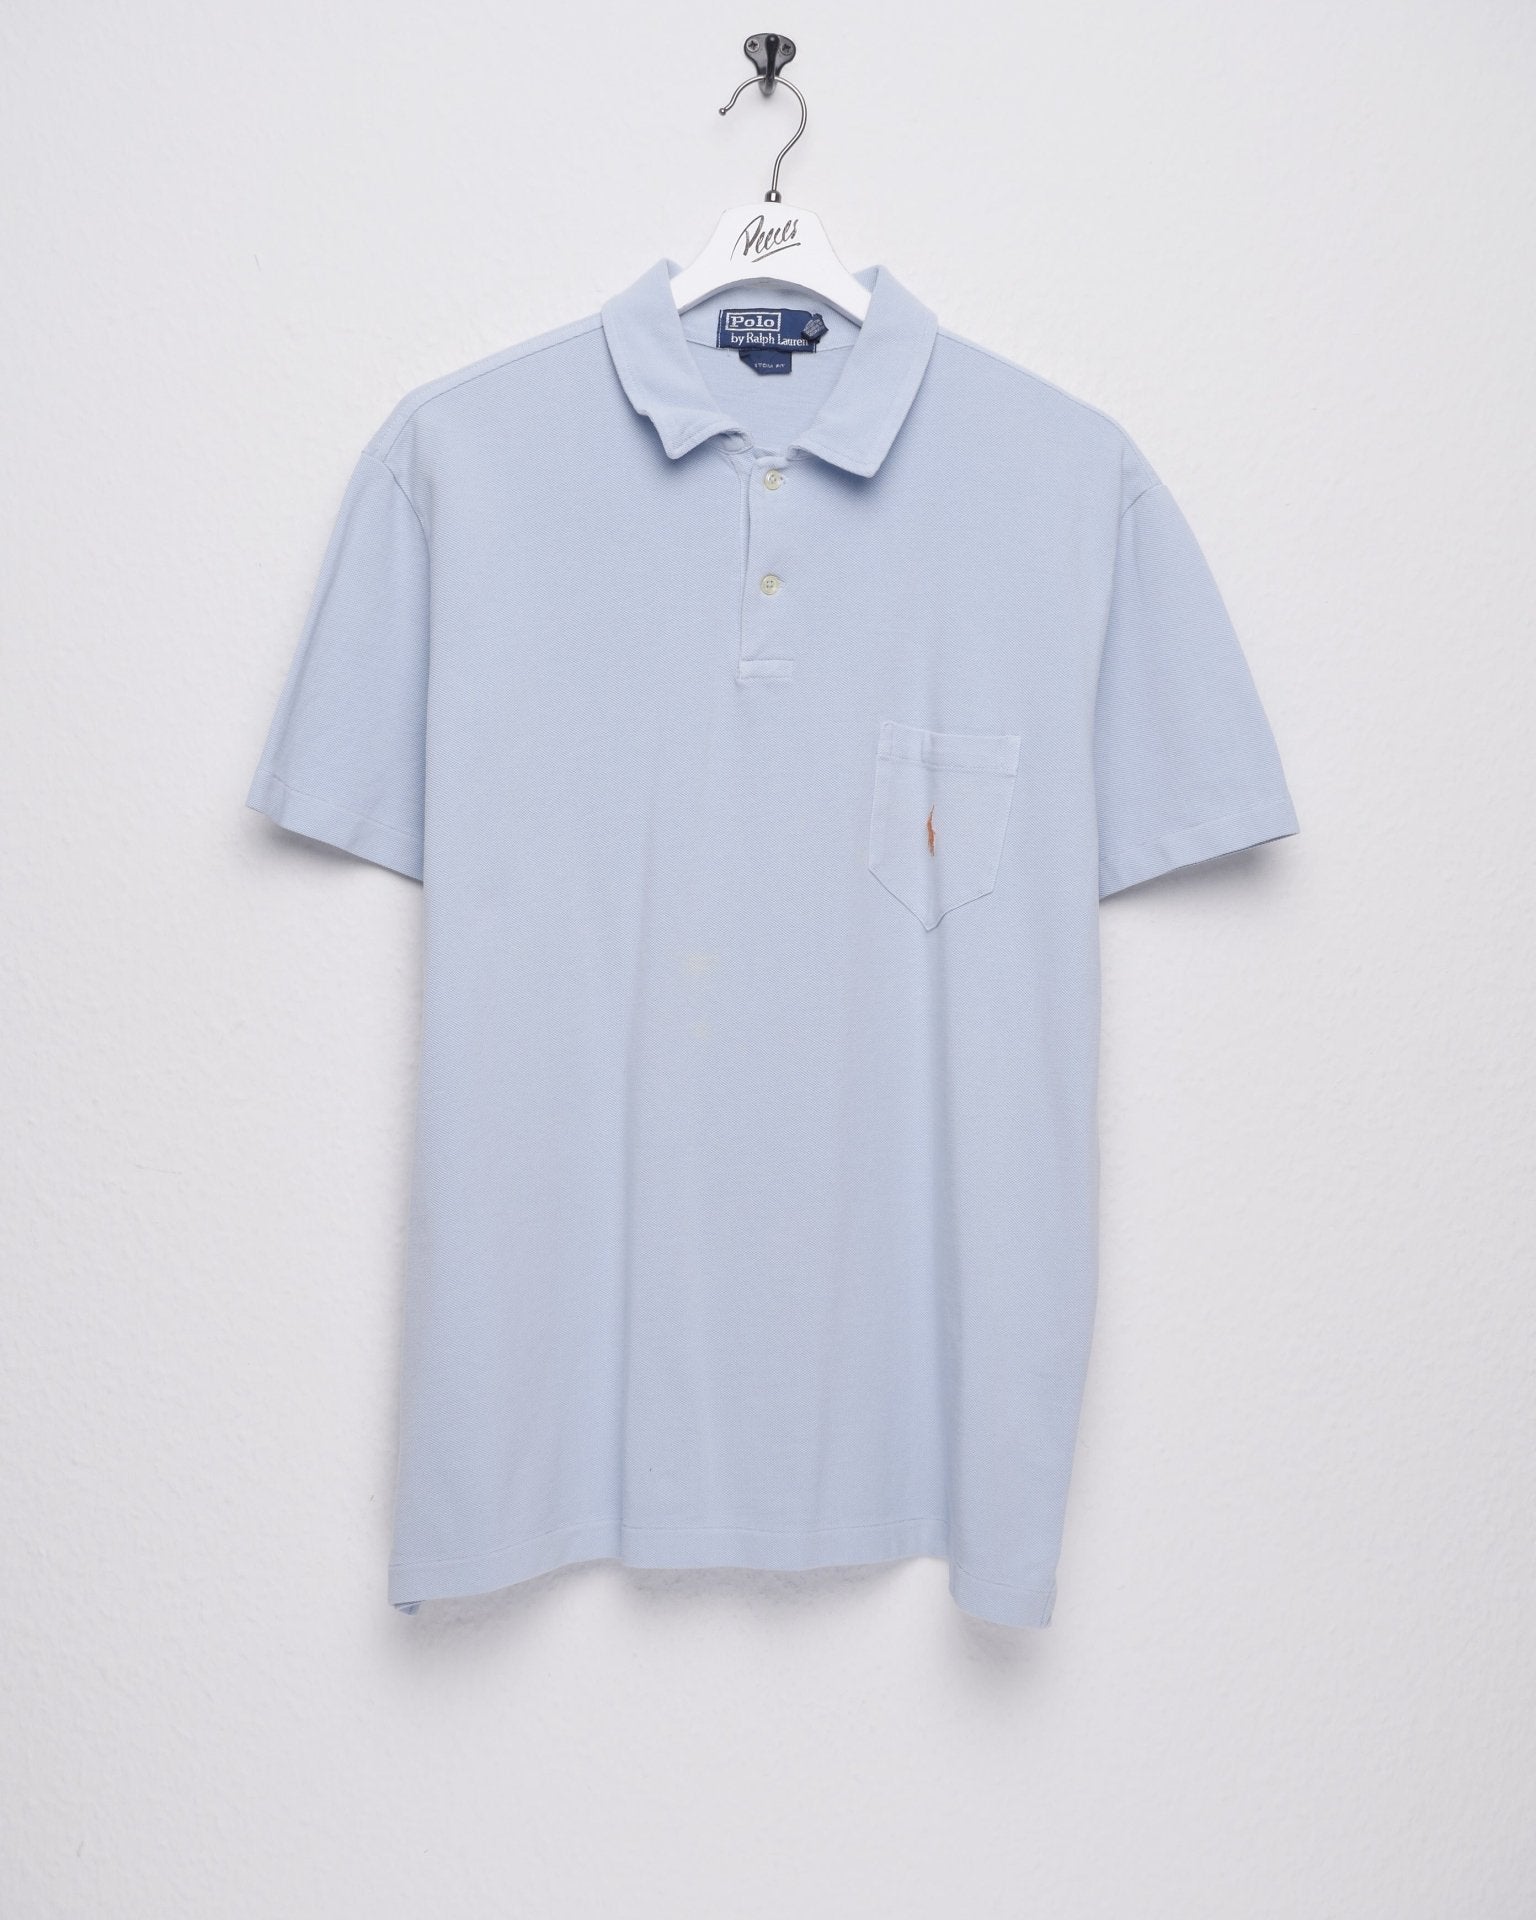 polo embroidered Logo washed light blue S/S Polo Shirt - Peeces